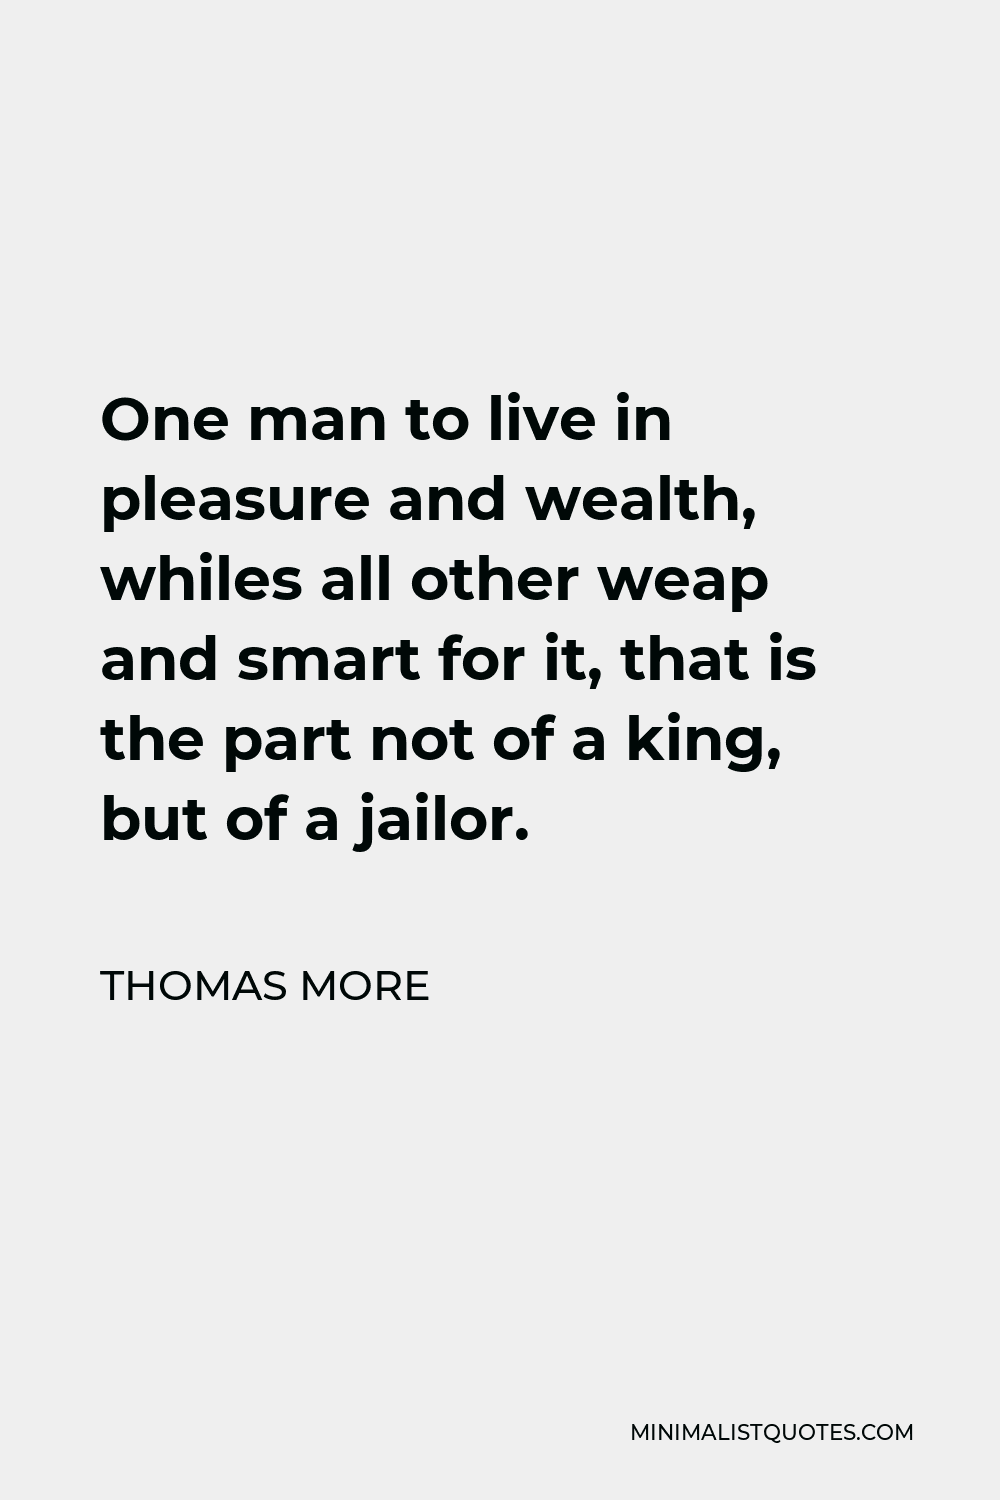 Thomas More Quote - One man to live in pleasure and wealth, whiles all other weap and smart for it, that is the part not of a king, but of a jailor.